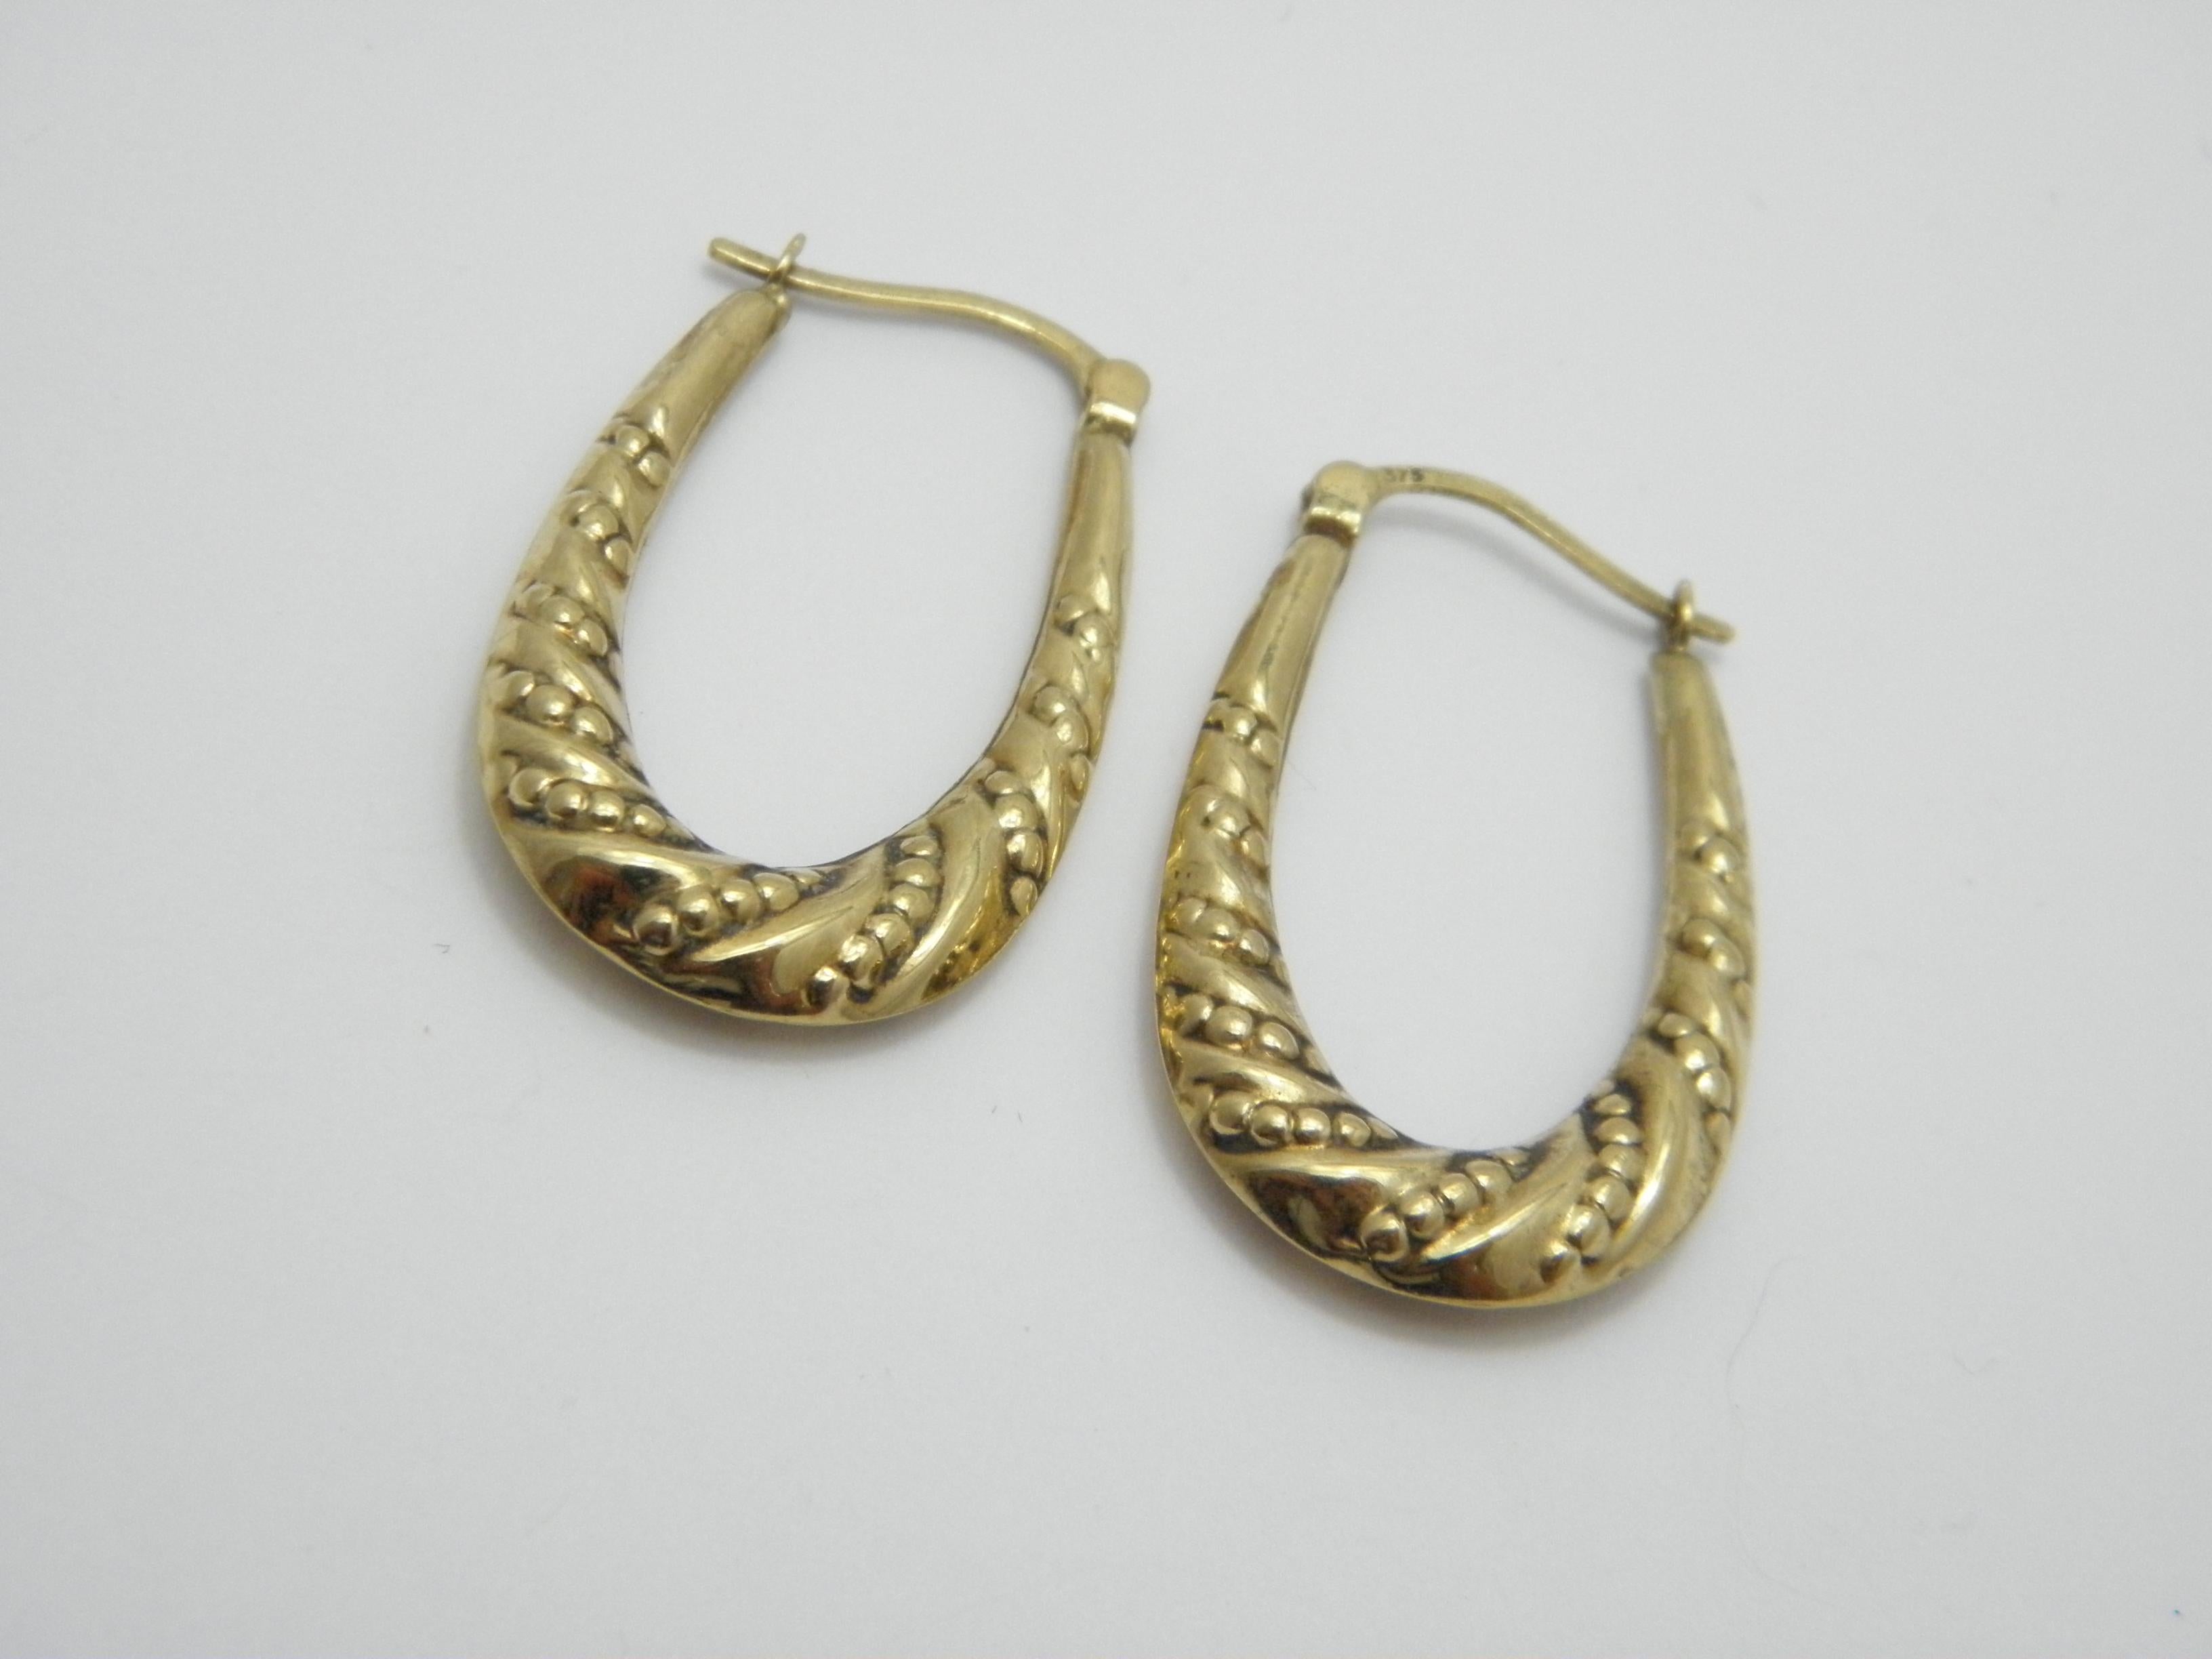 A very special item for you to consider:

9CT GOLD PATTERNED LARGE HUGGIE HOOP CREOLE EARRINGS

DETAILS
Material: 375/1000 9ct Solid Yellow Gold
Style: Nouveau style large huggie hoop earrings with lovely bobble patterns.
Fastening: Lever wires,